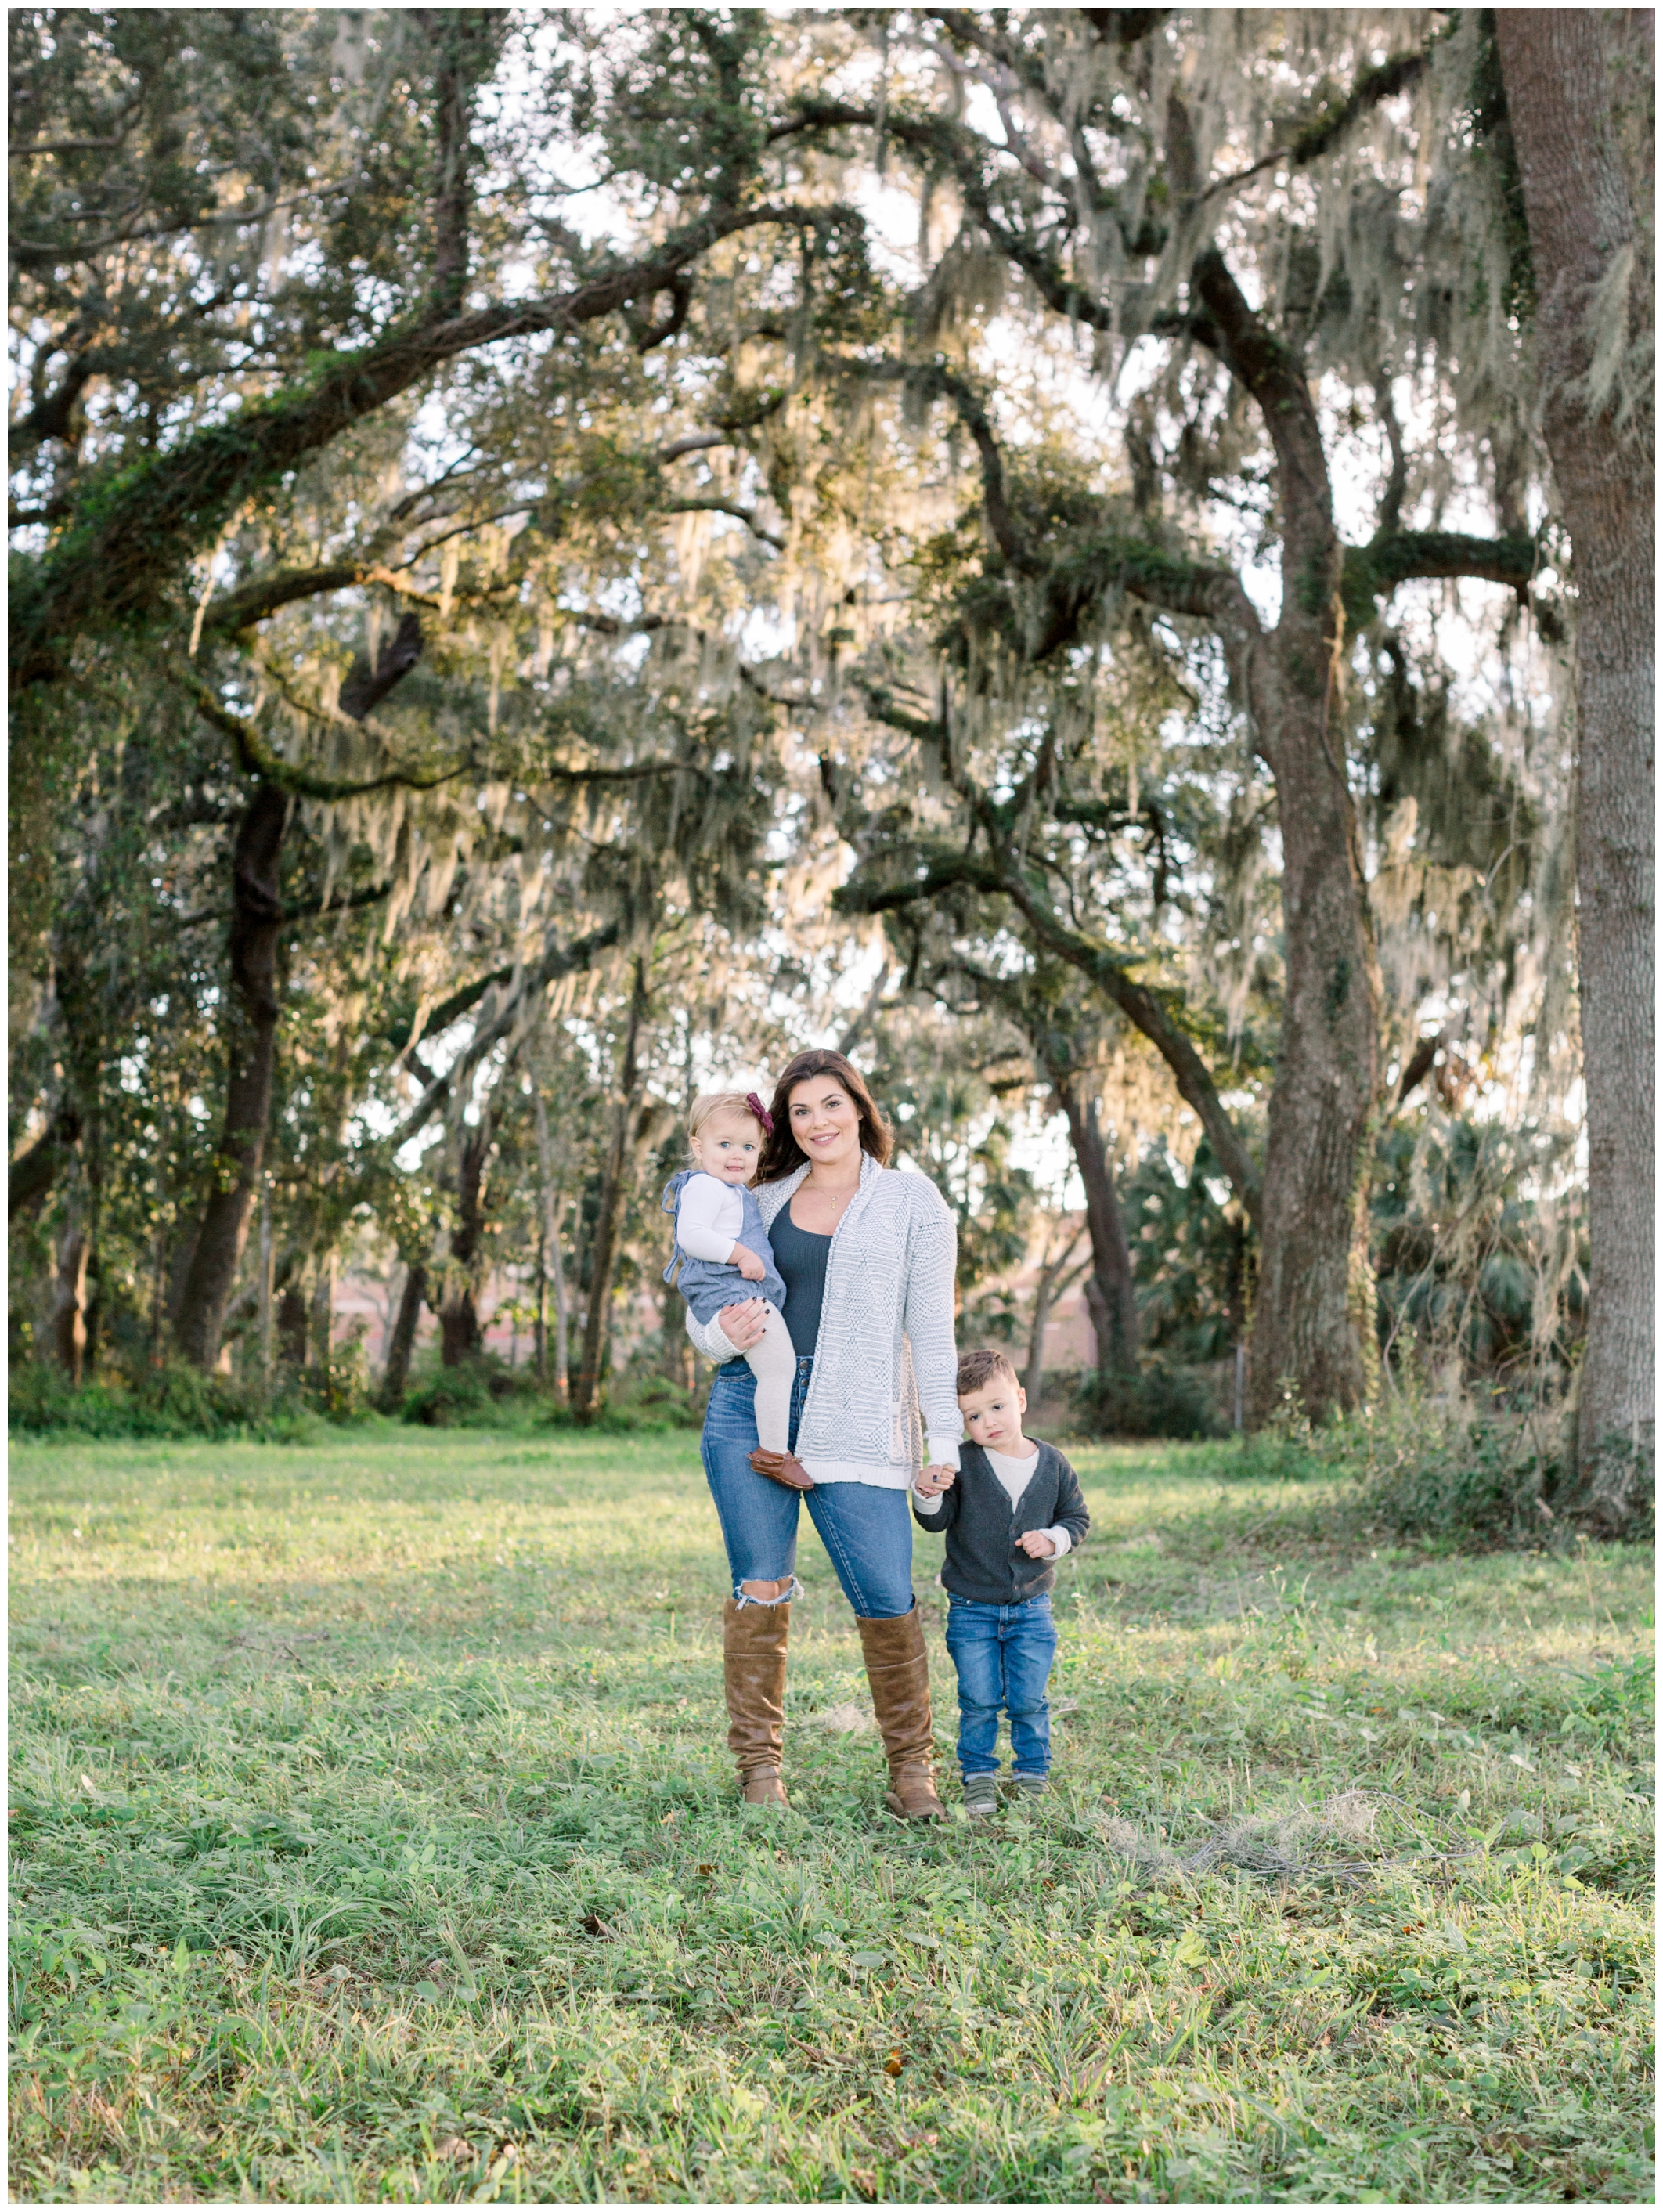 Lisa Silva Photography- Ponte Vedra Beach, St. Augustine and Jacksonville, Florida Fine Art Film Destination Wedding Photography- Family Lifestyle Session in St. Augustine_0000.jpg